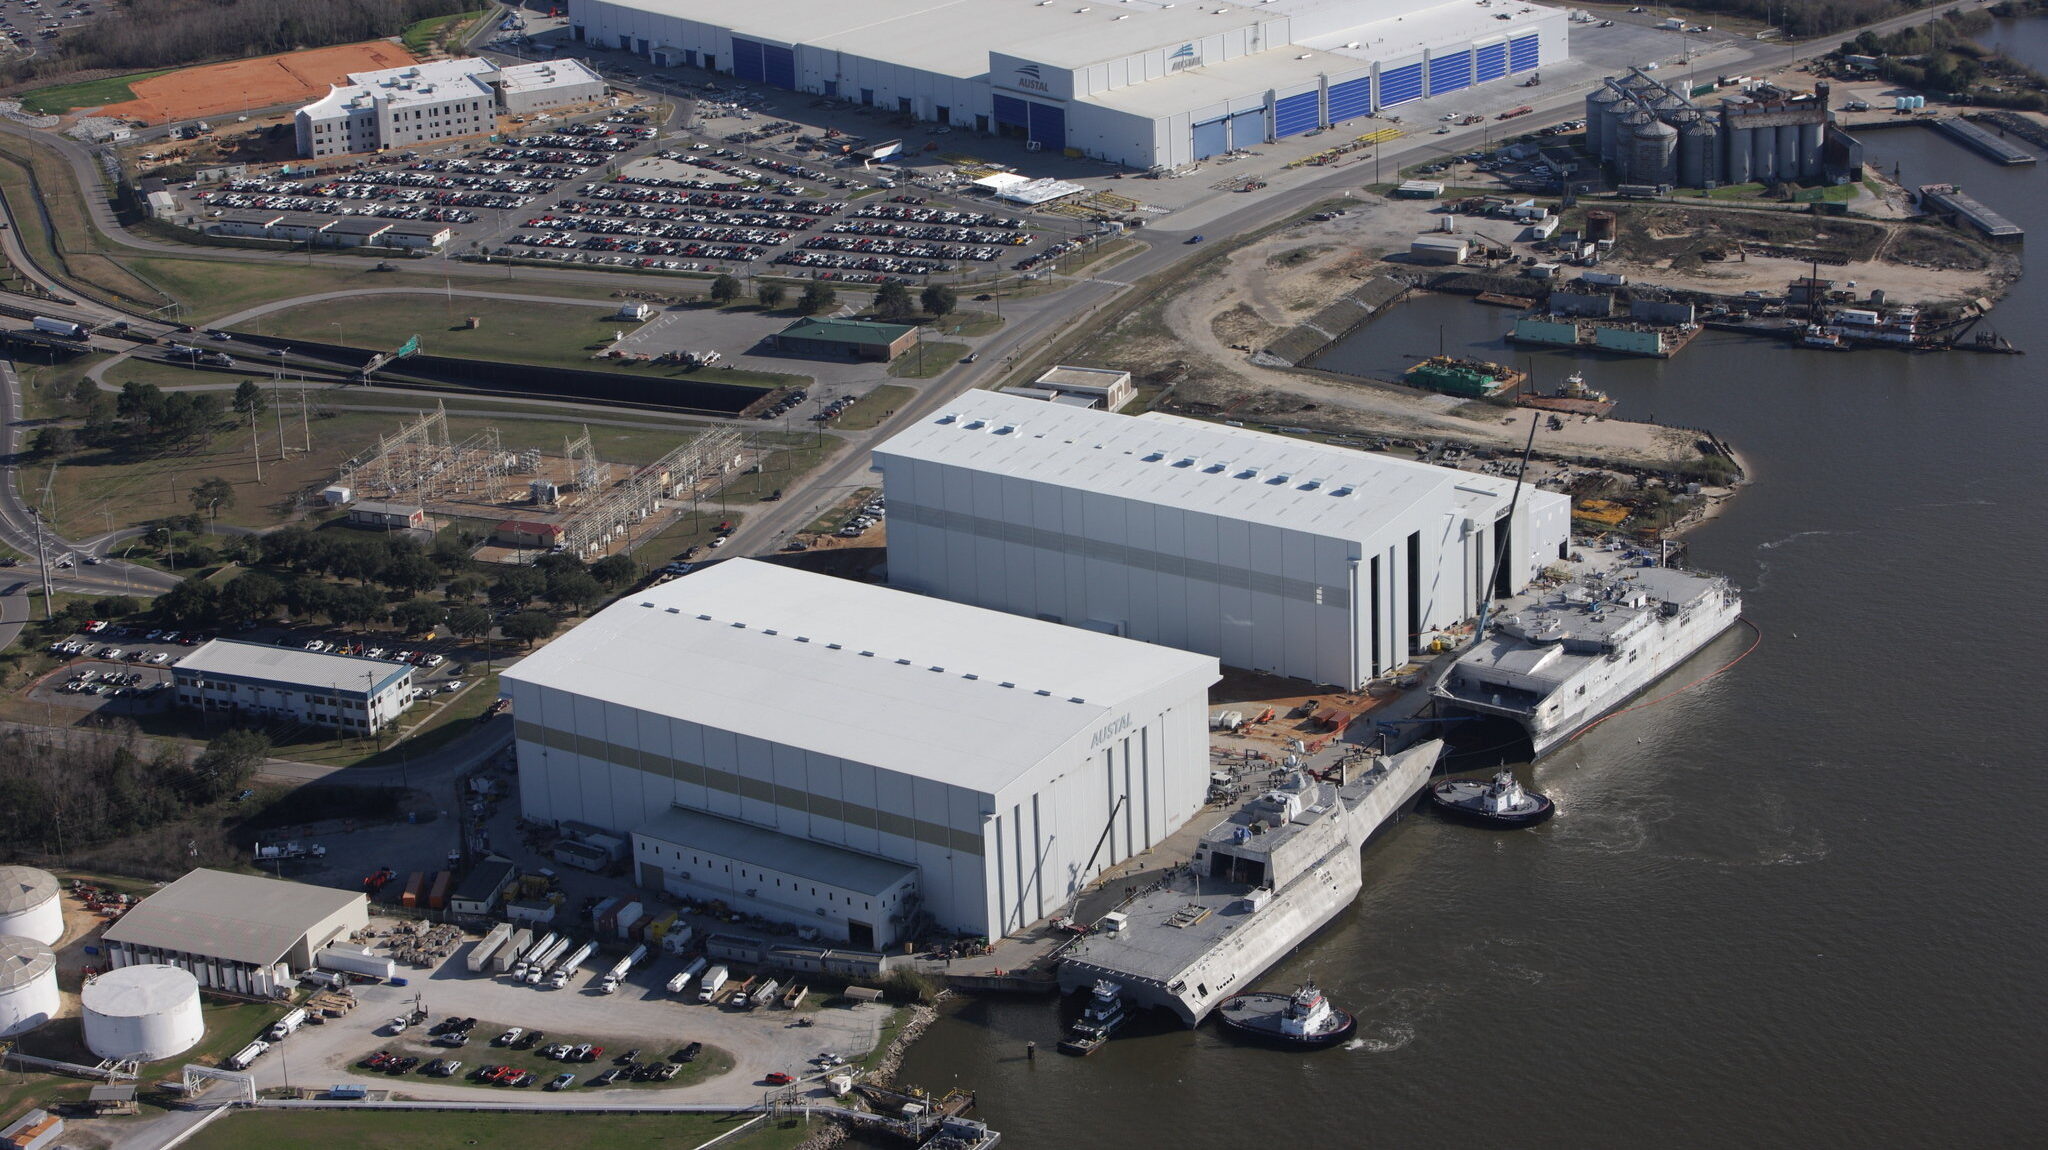 Austal USA wins Navy steel shipbuilding contract with floating dry dock